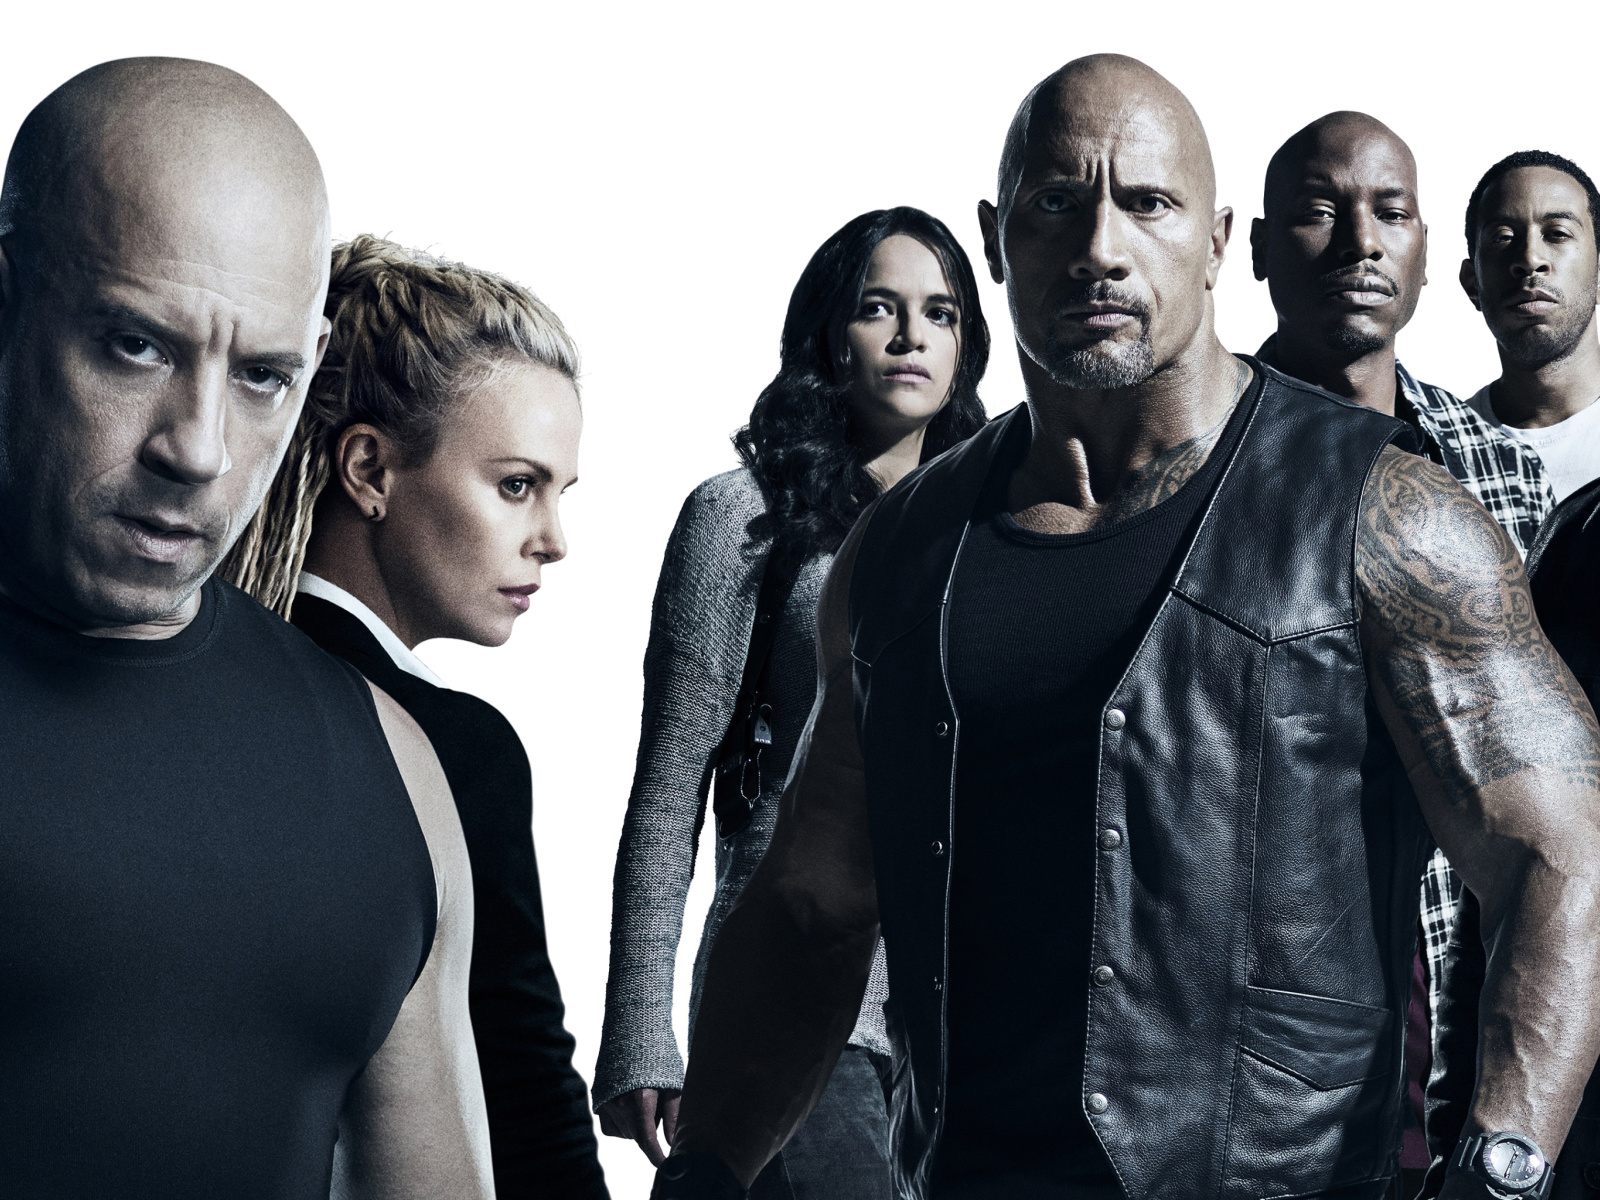 The Fate of the Furious Cast wallpaper 1600x1200